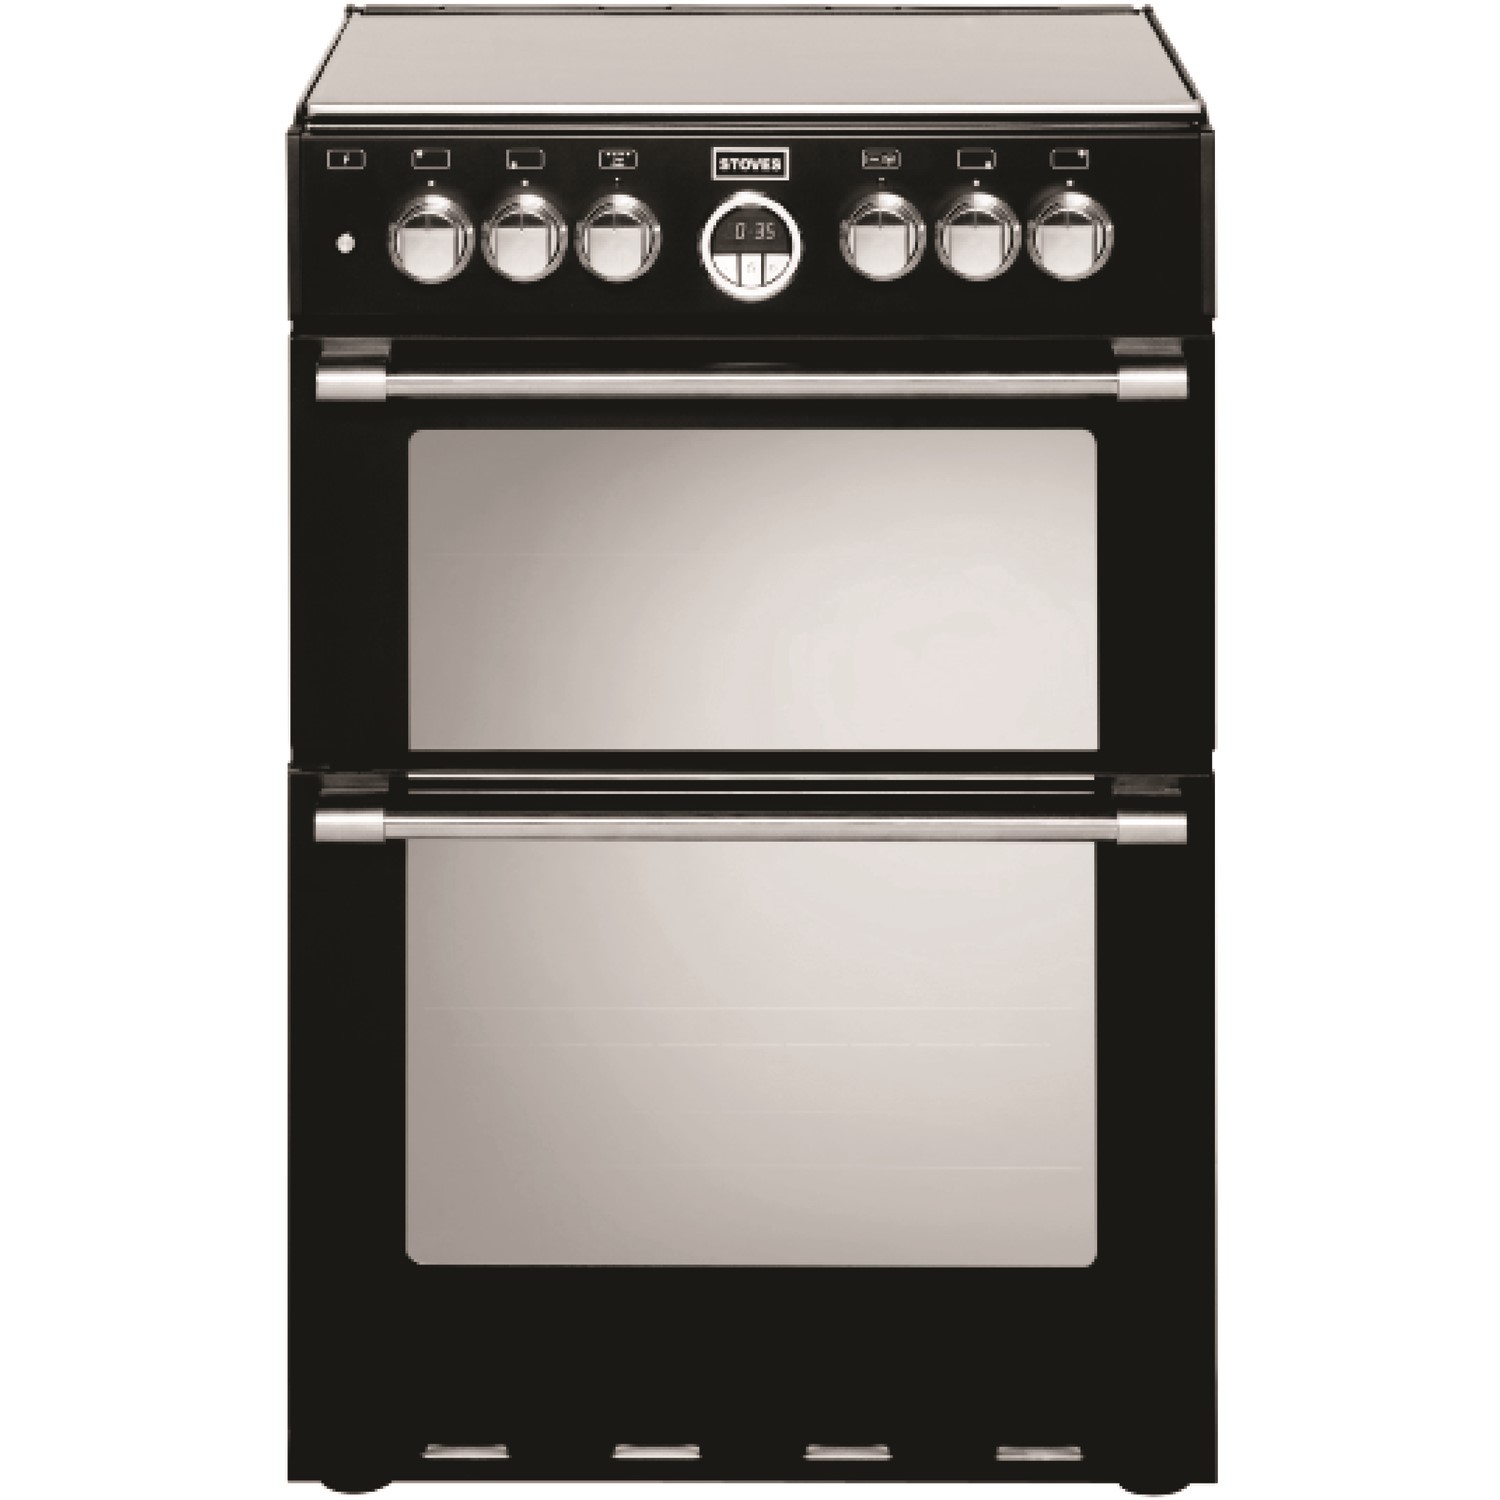 Refurbished Stoves Sterling 600DF Black Dual Fuel Cooker with Double Oven